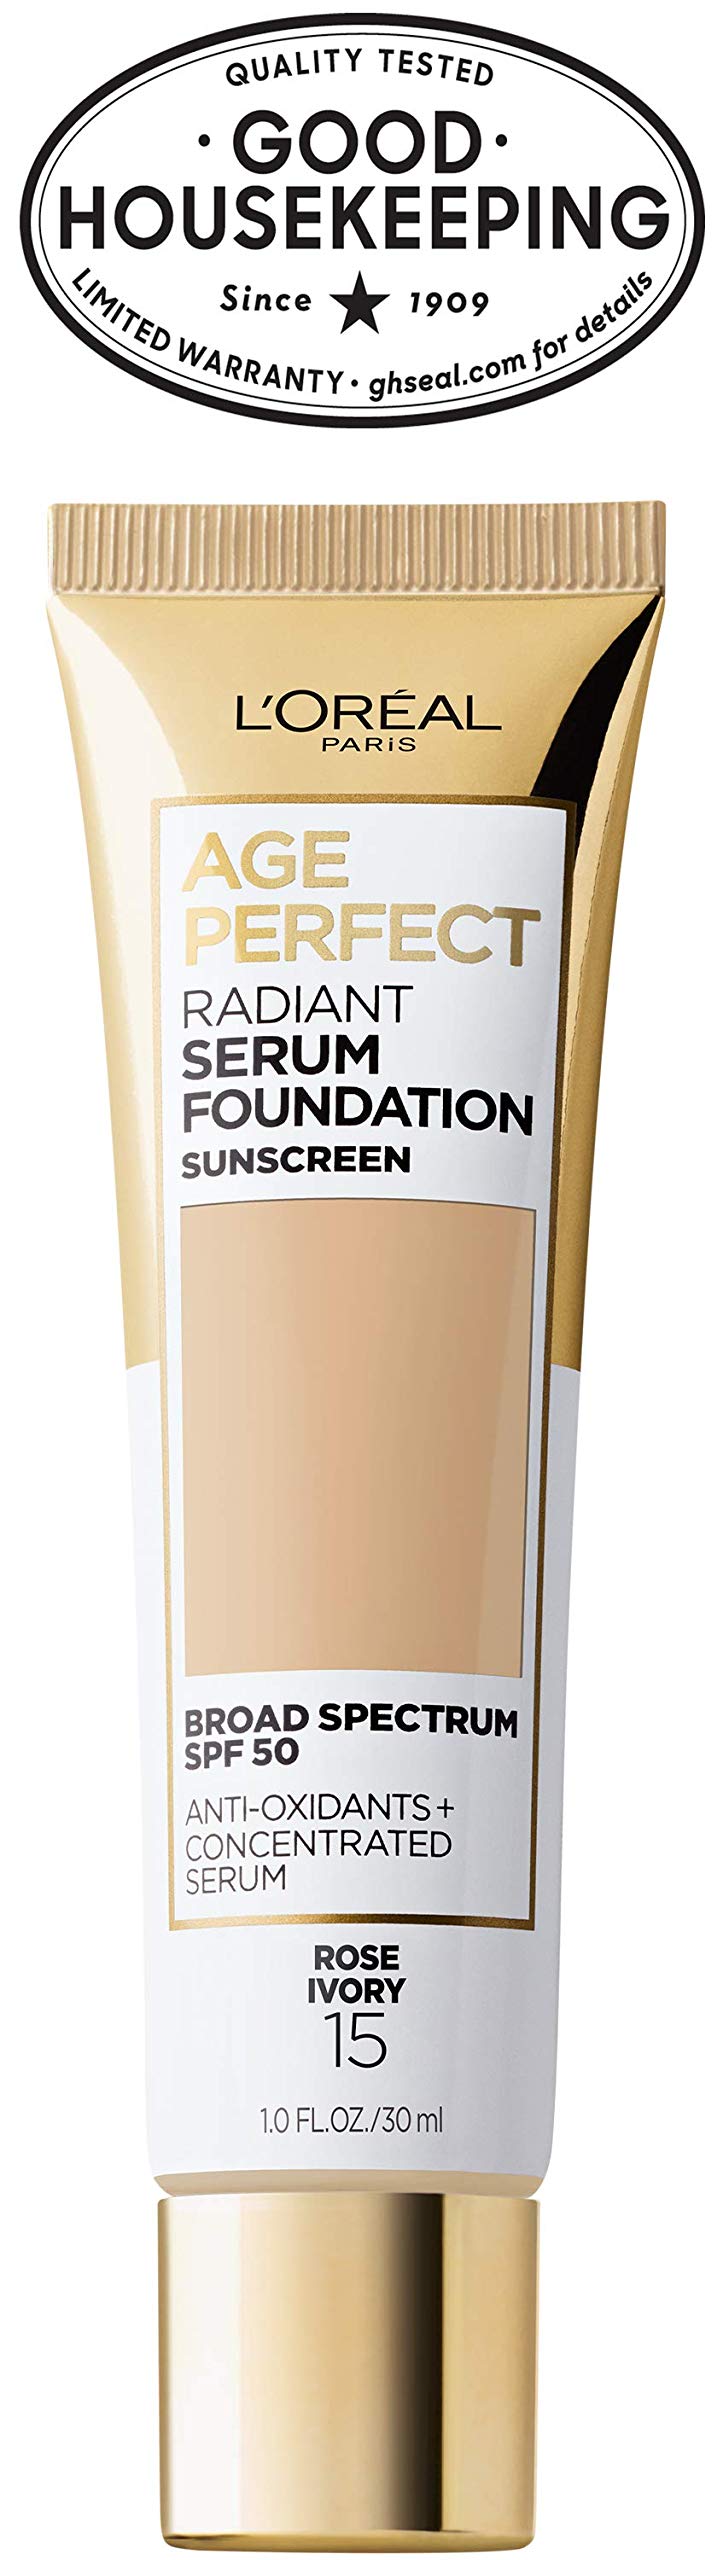 L’Oréal Paris Age Perfect Radiant Serum Foundation with SPF 50, Rose Ivory, 1 Ounce